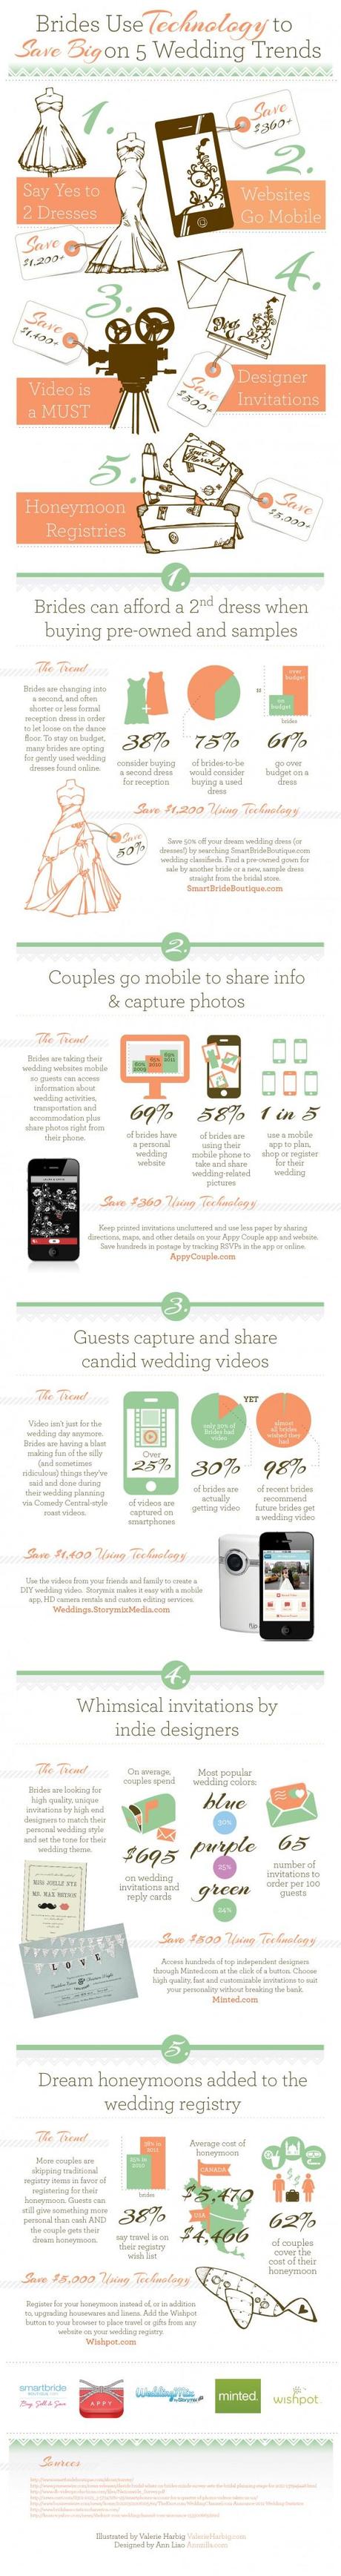 How to Save Over $7,000 on Your Wedding Using Technology